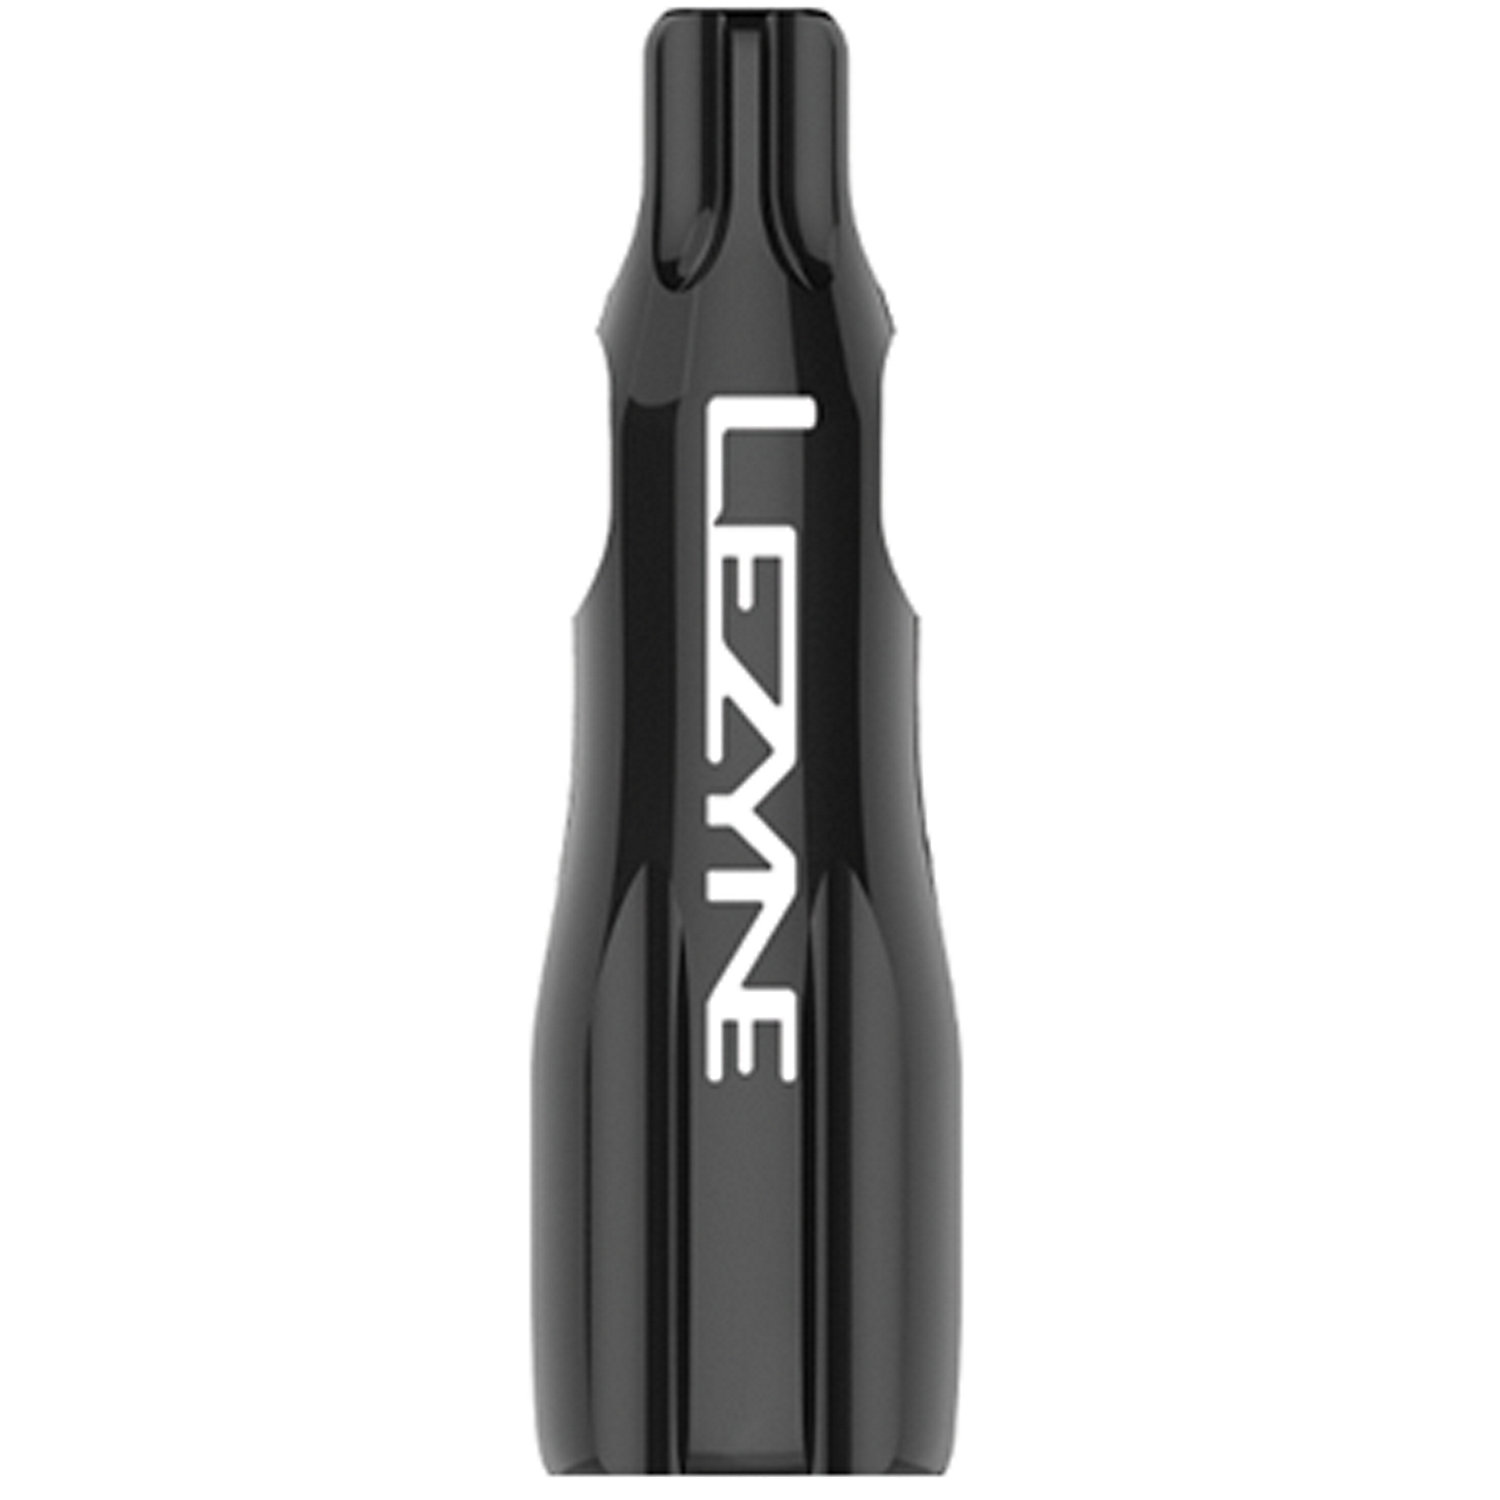 Lezyne CNC TLR Valve w/ Valve Core Wrench